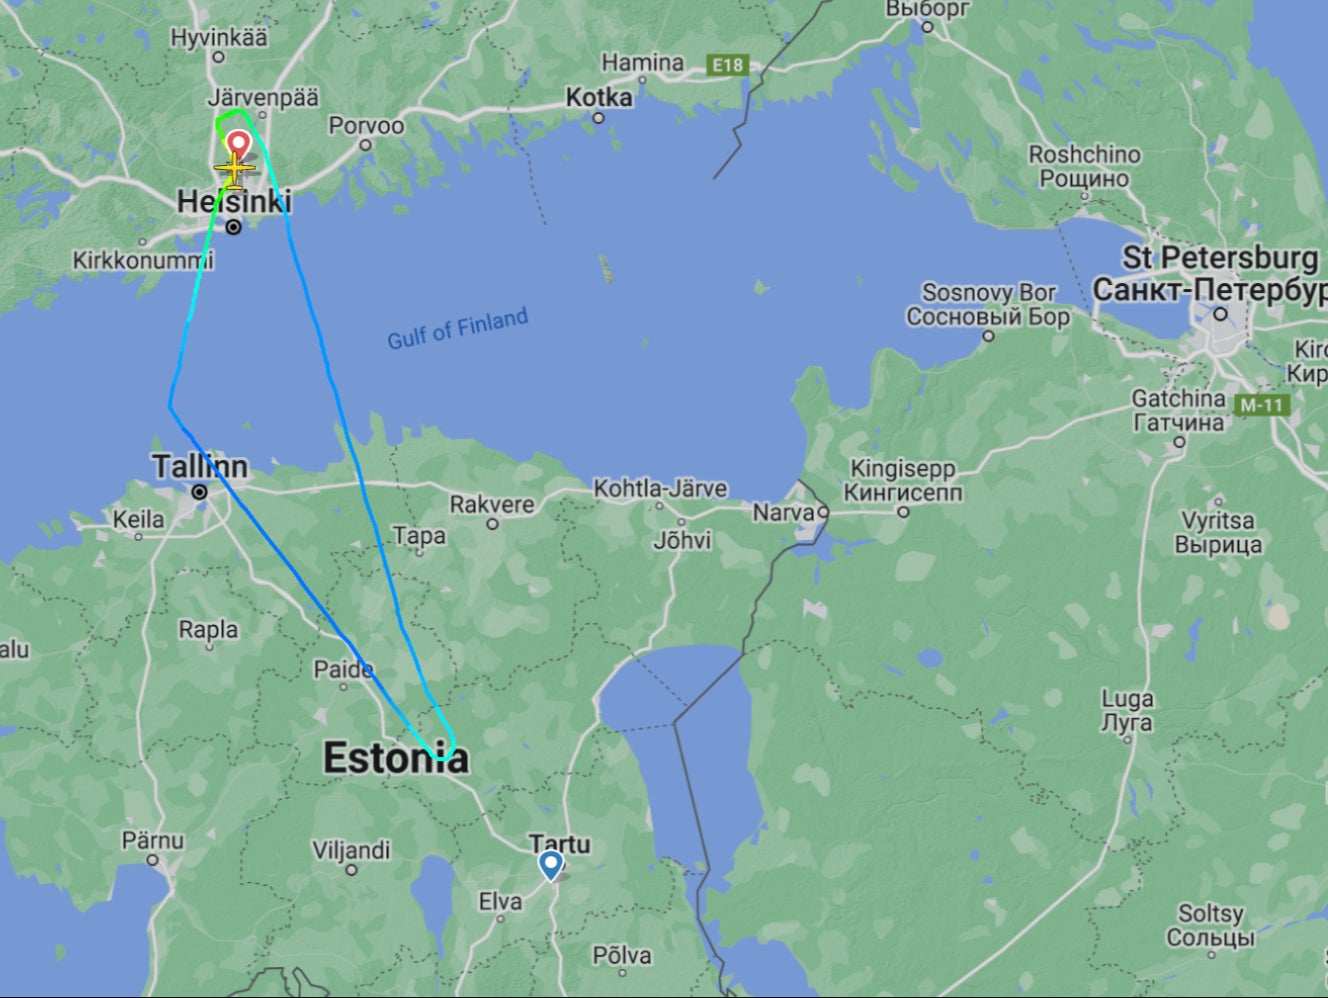 Return trip: the flight path of Finnair AY1045 on 26 April, when the aircraft returned to Helsinki due to GPS interference